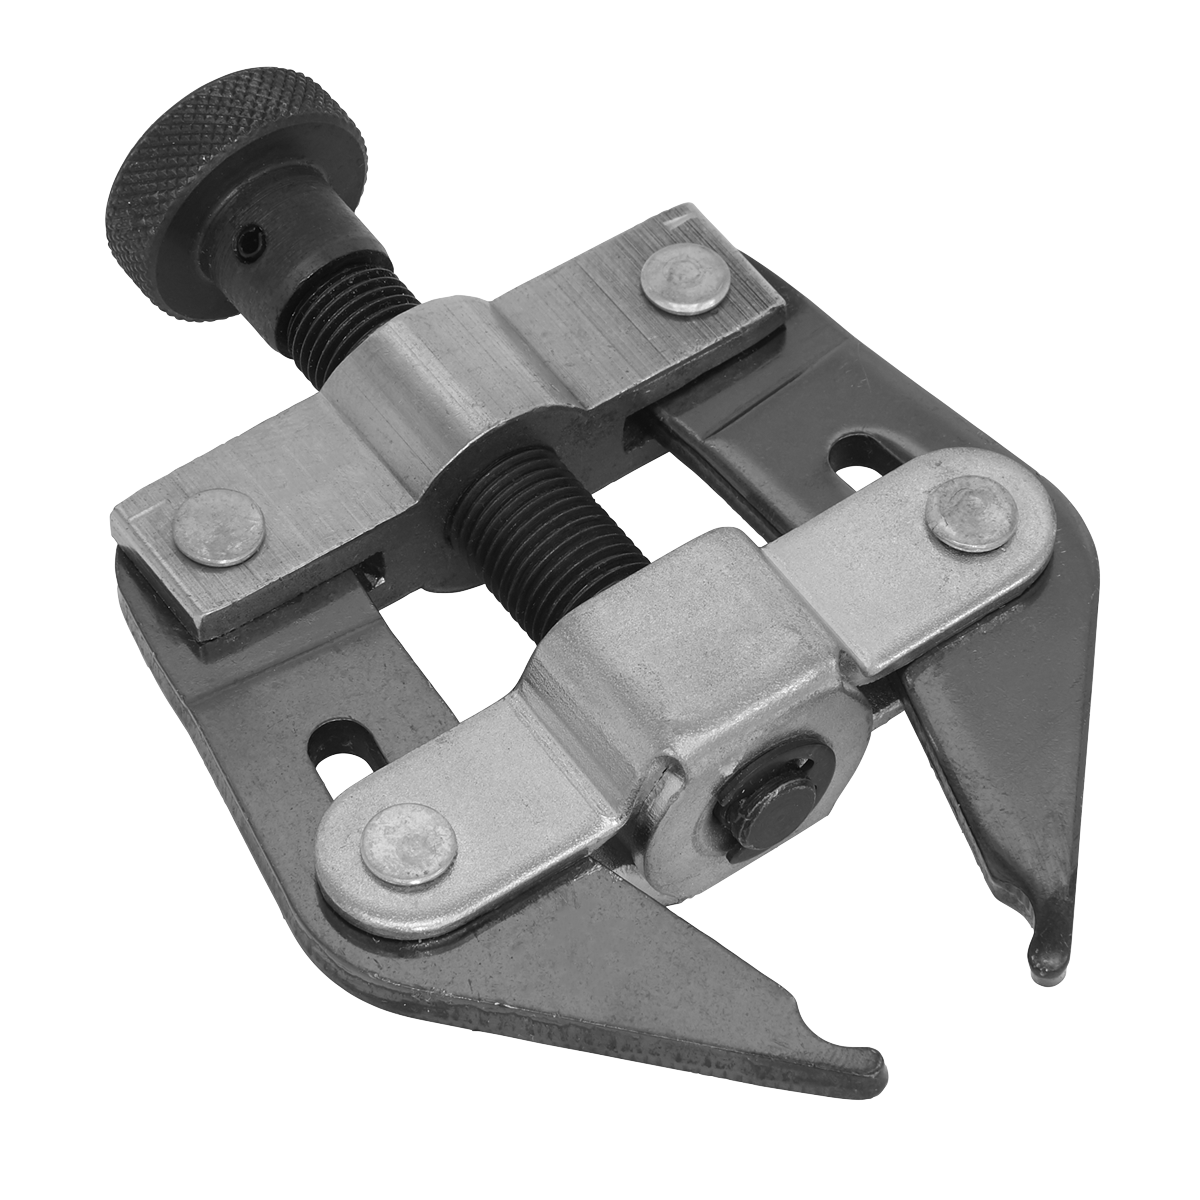 Motorcycle Chain Puller - SMC5 - Farming Parts